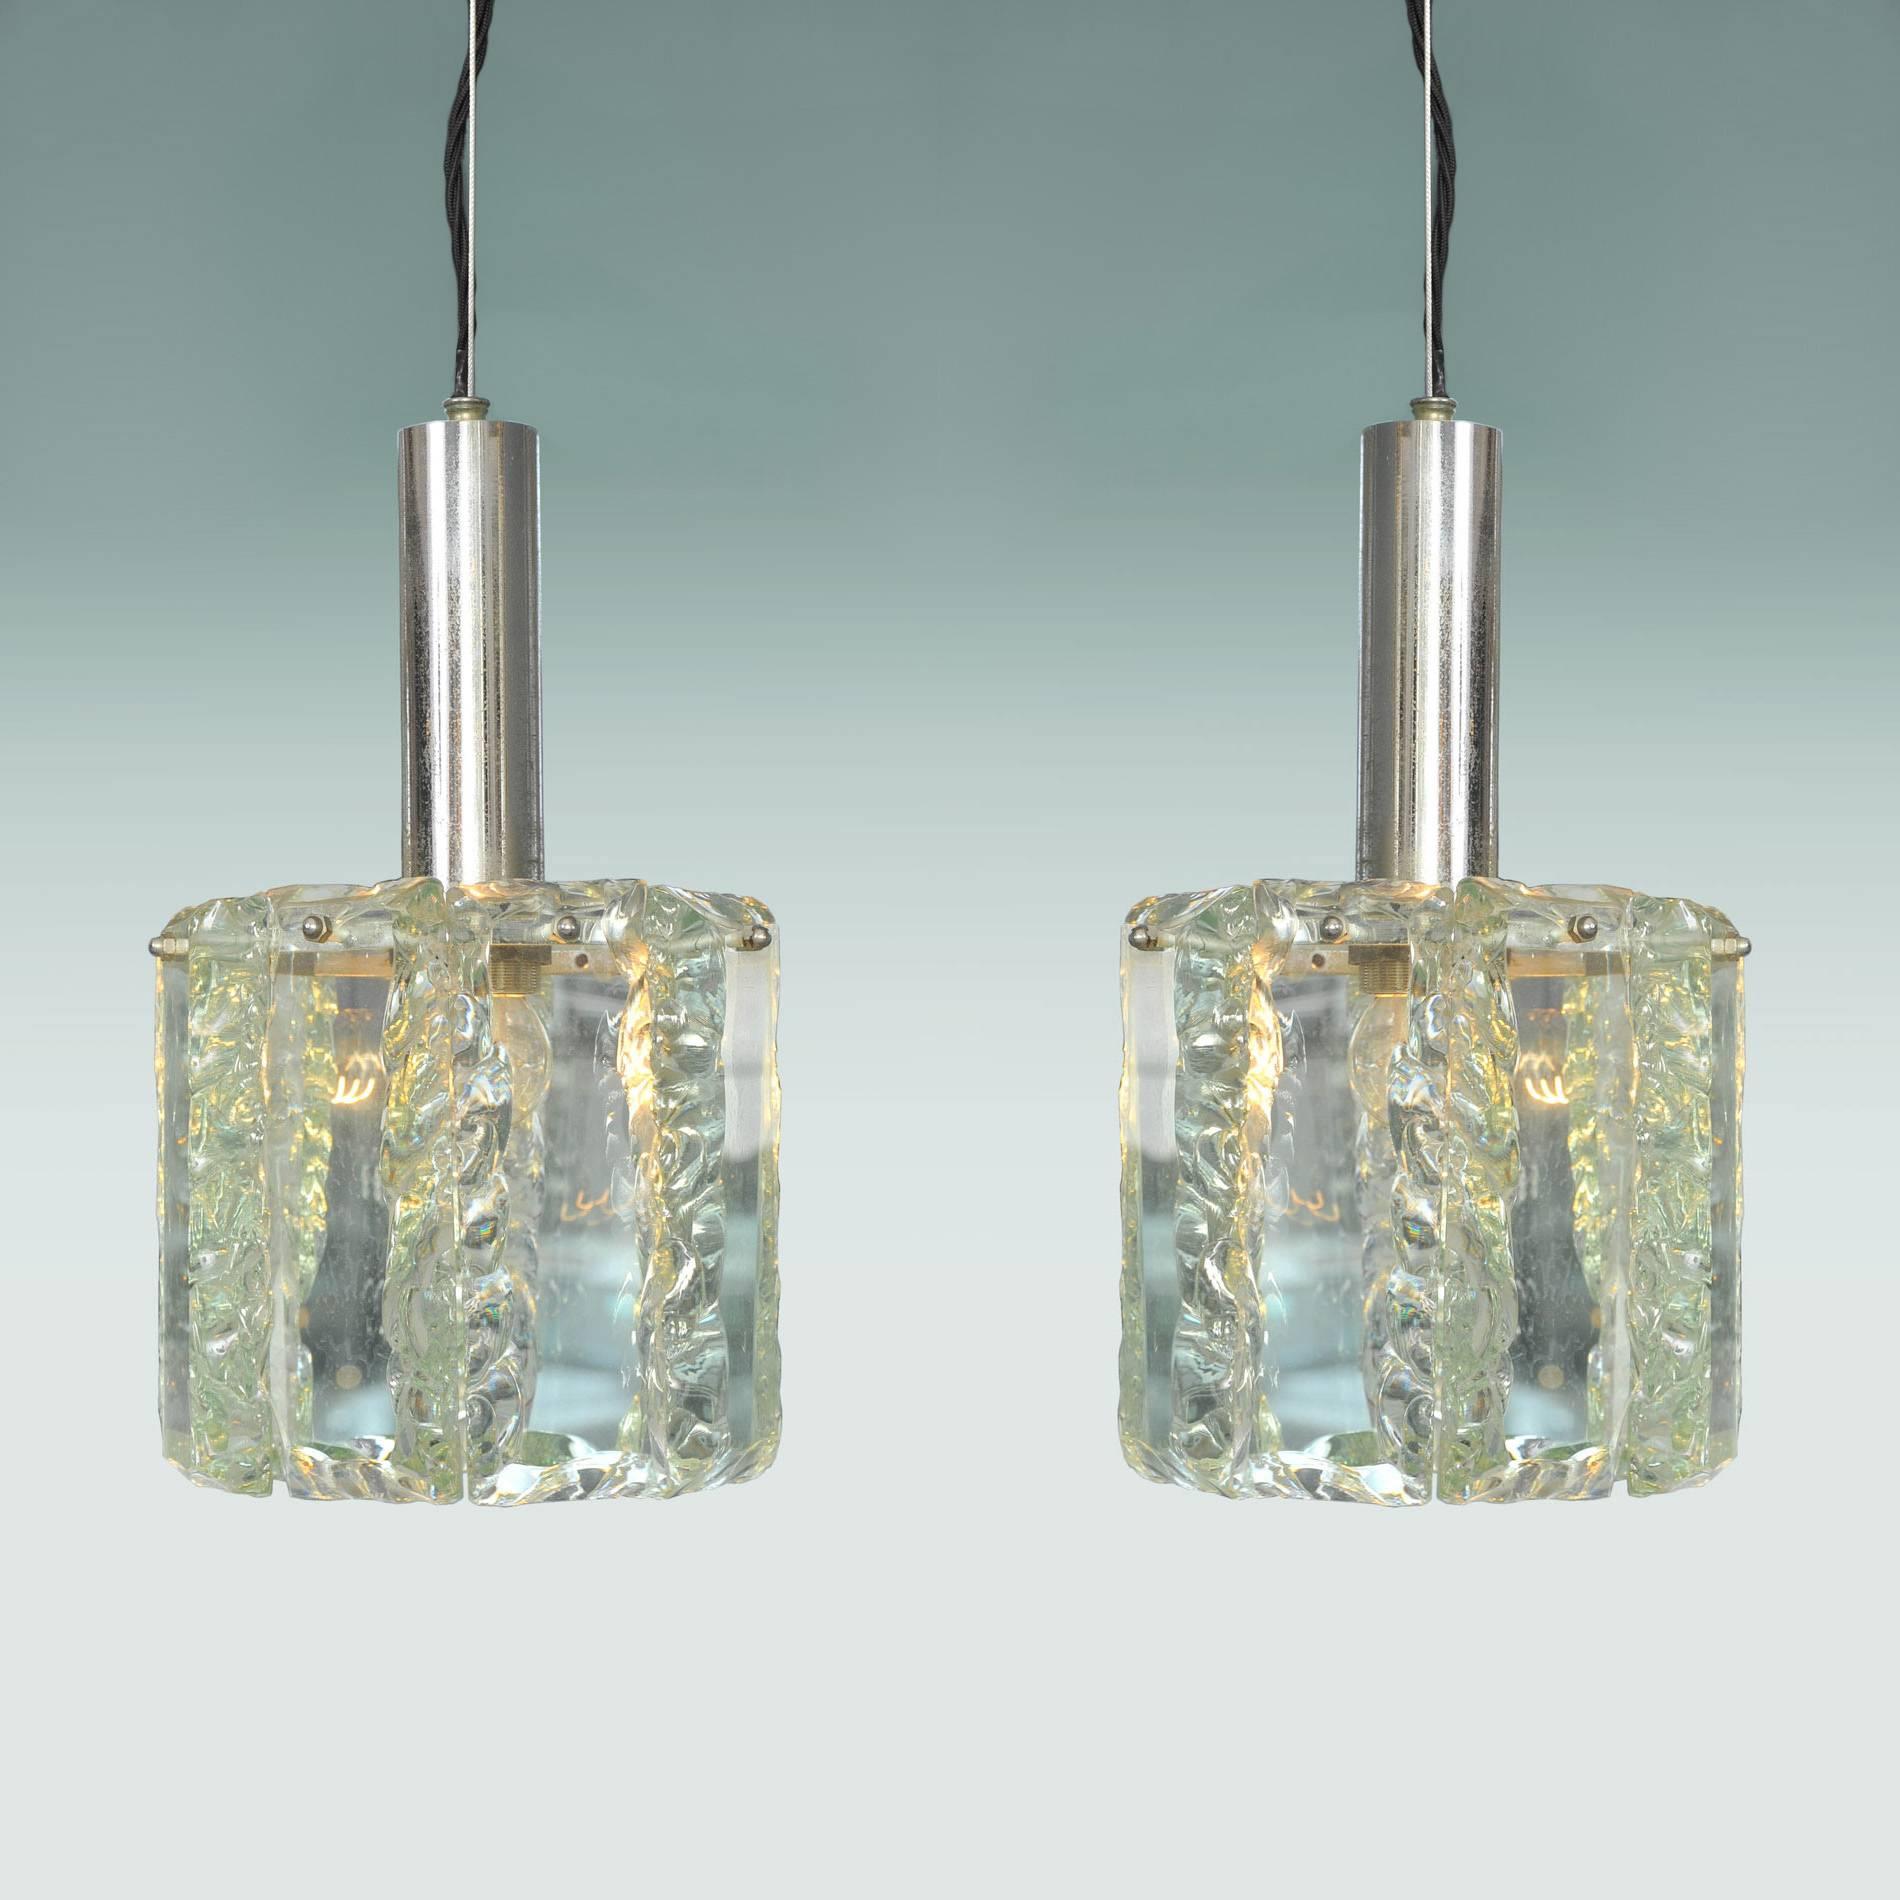 Fine pair of pendants with faceted Murano glass drops of very pale eau de nil forming a circular shade supported by their original chrome frames.